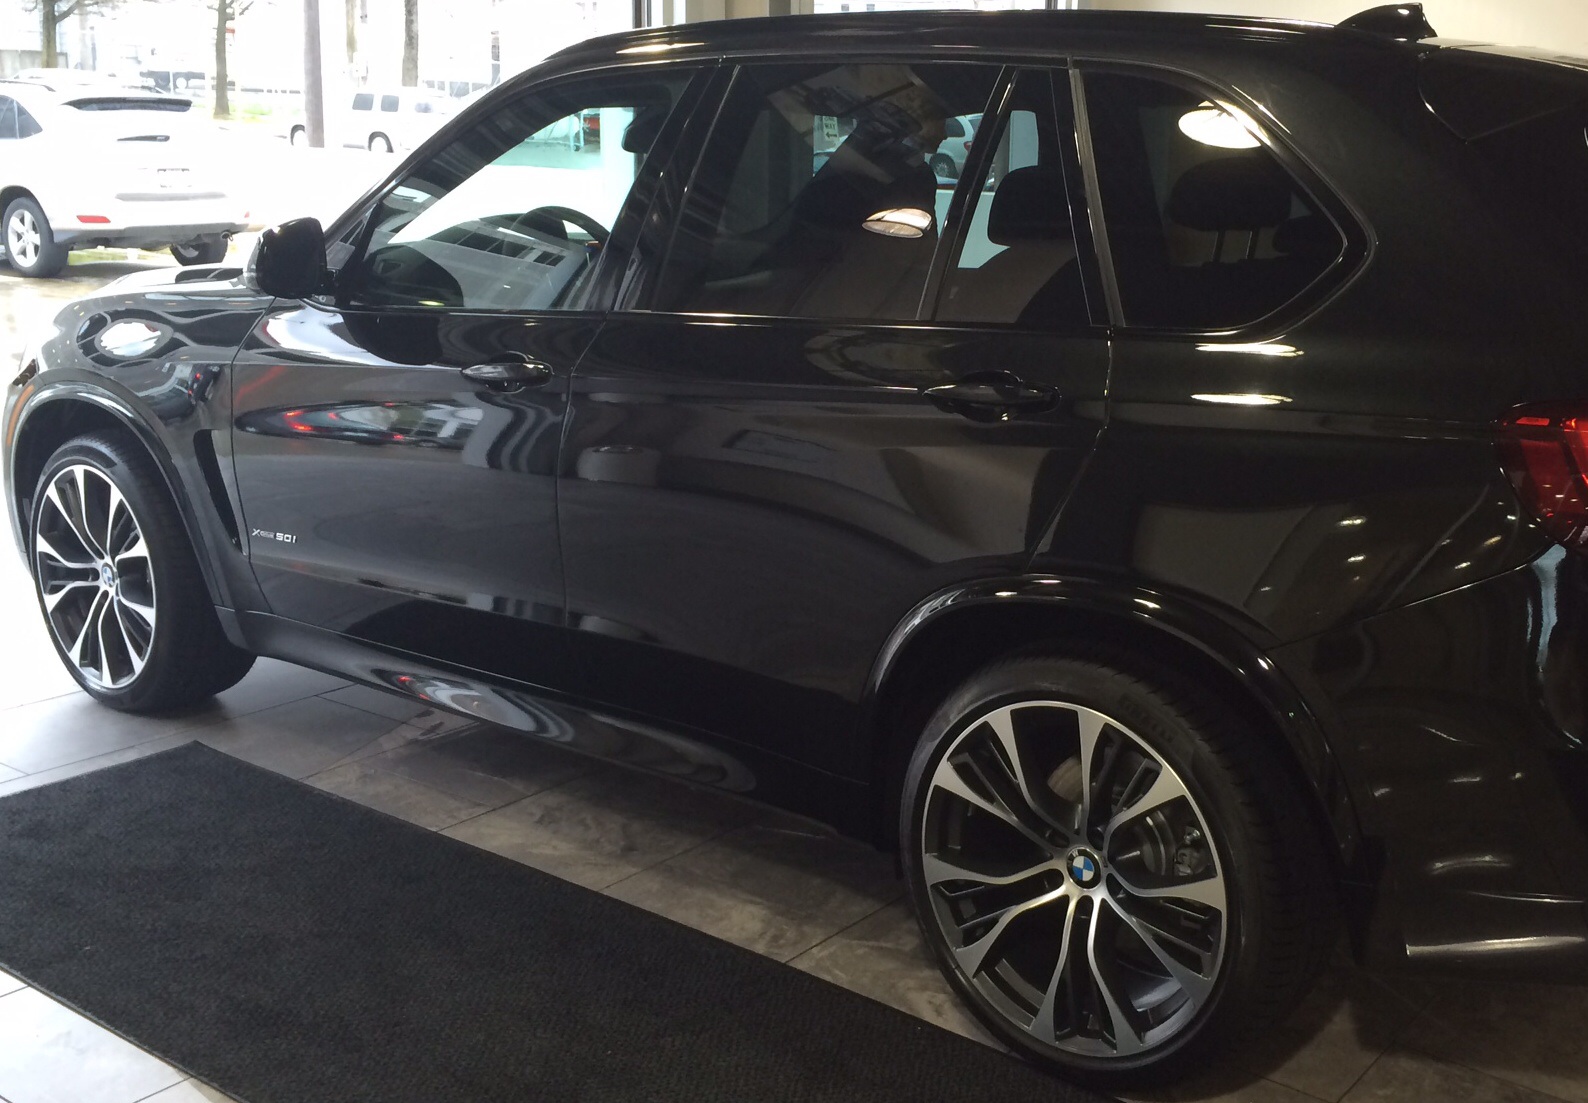 My time ... will finally come !! :-) - BMW X5 and X6 Forum (F15/F16)